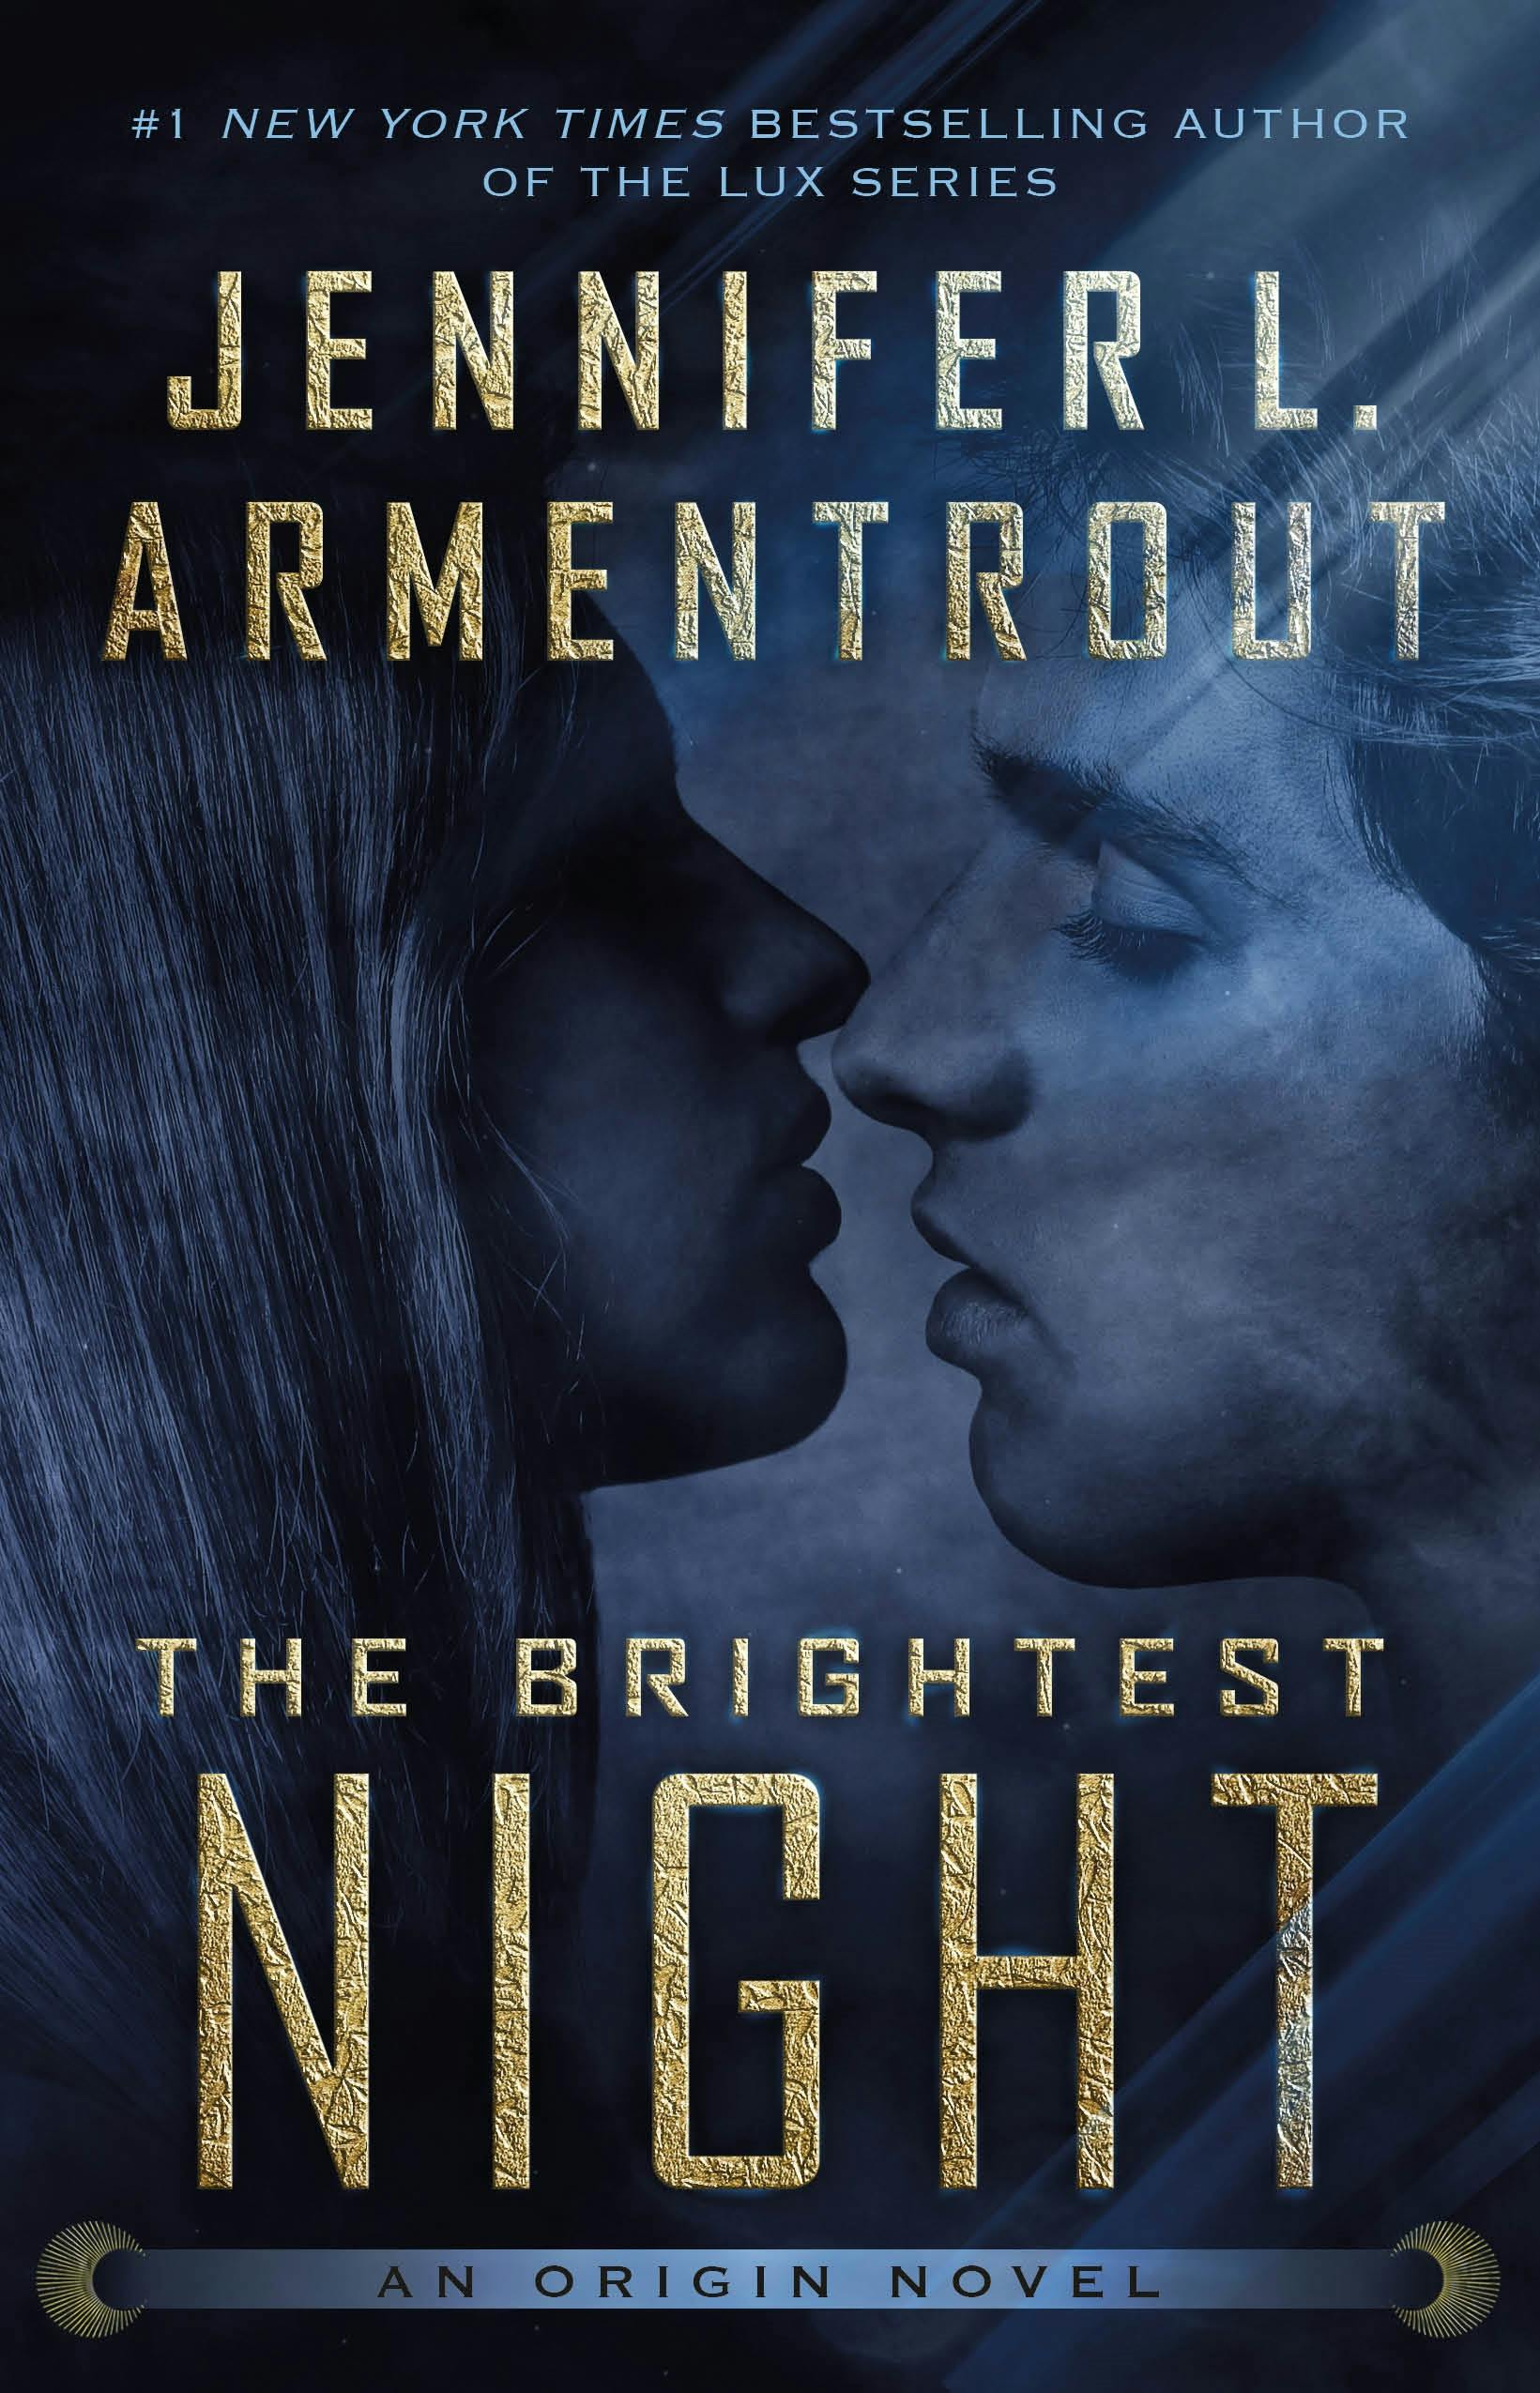 Cover for the book titled as: The Brightest Night